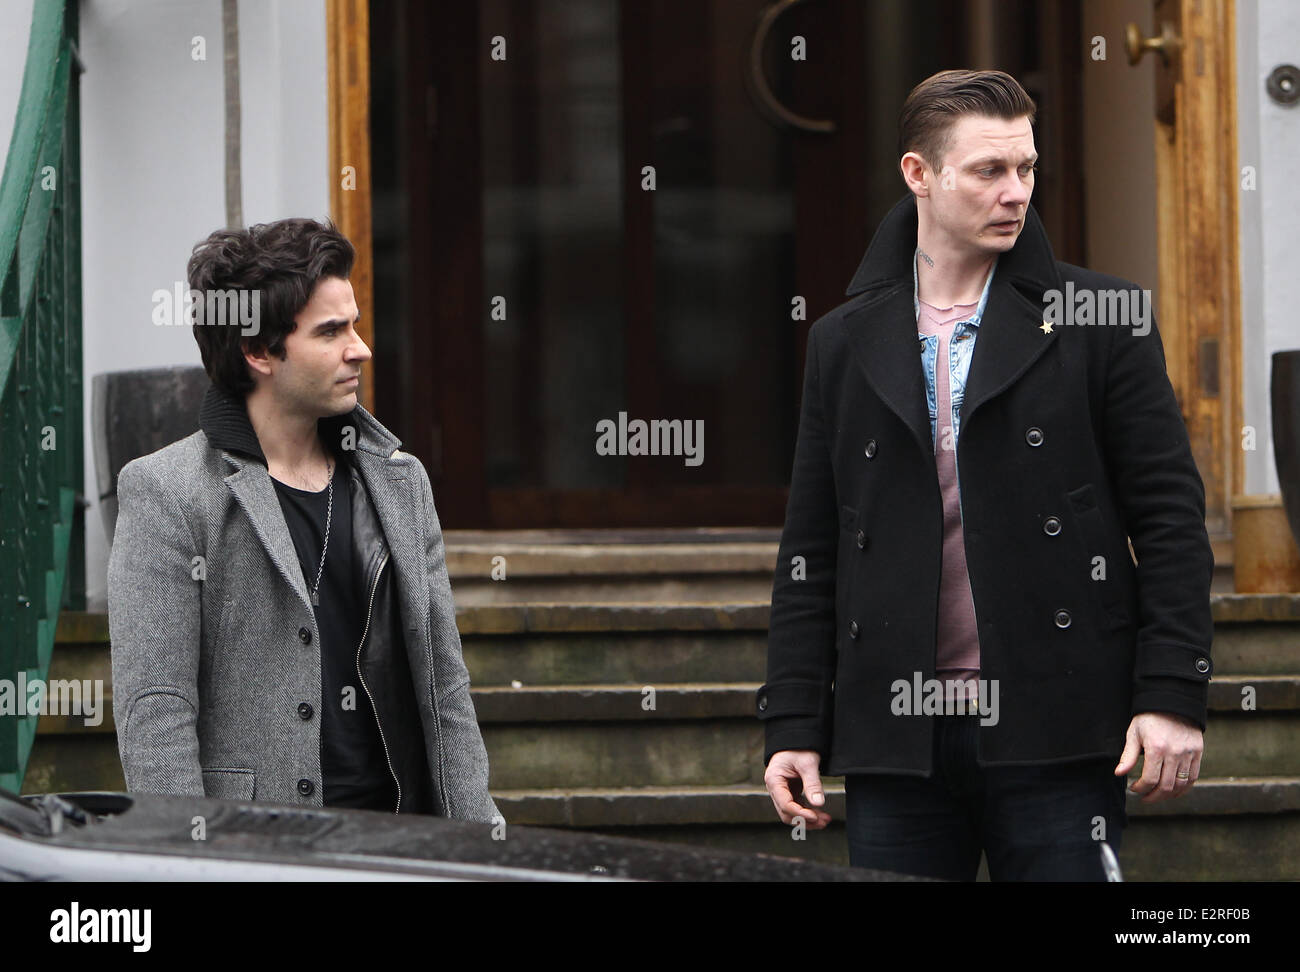 Kelly Jones and Richard Jones of the Stereophonics leave Abbey Road Studios. On Monday 11th February 1963 the Beatles’ debut album was recorded in just one day. On the 50th anniversary of that 12-hour session at Abbey Road, leading artists are attempting Stock Photo